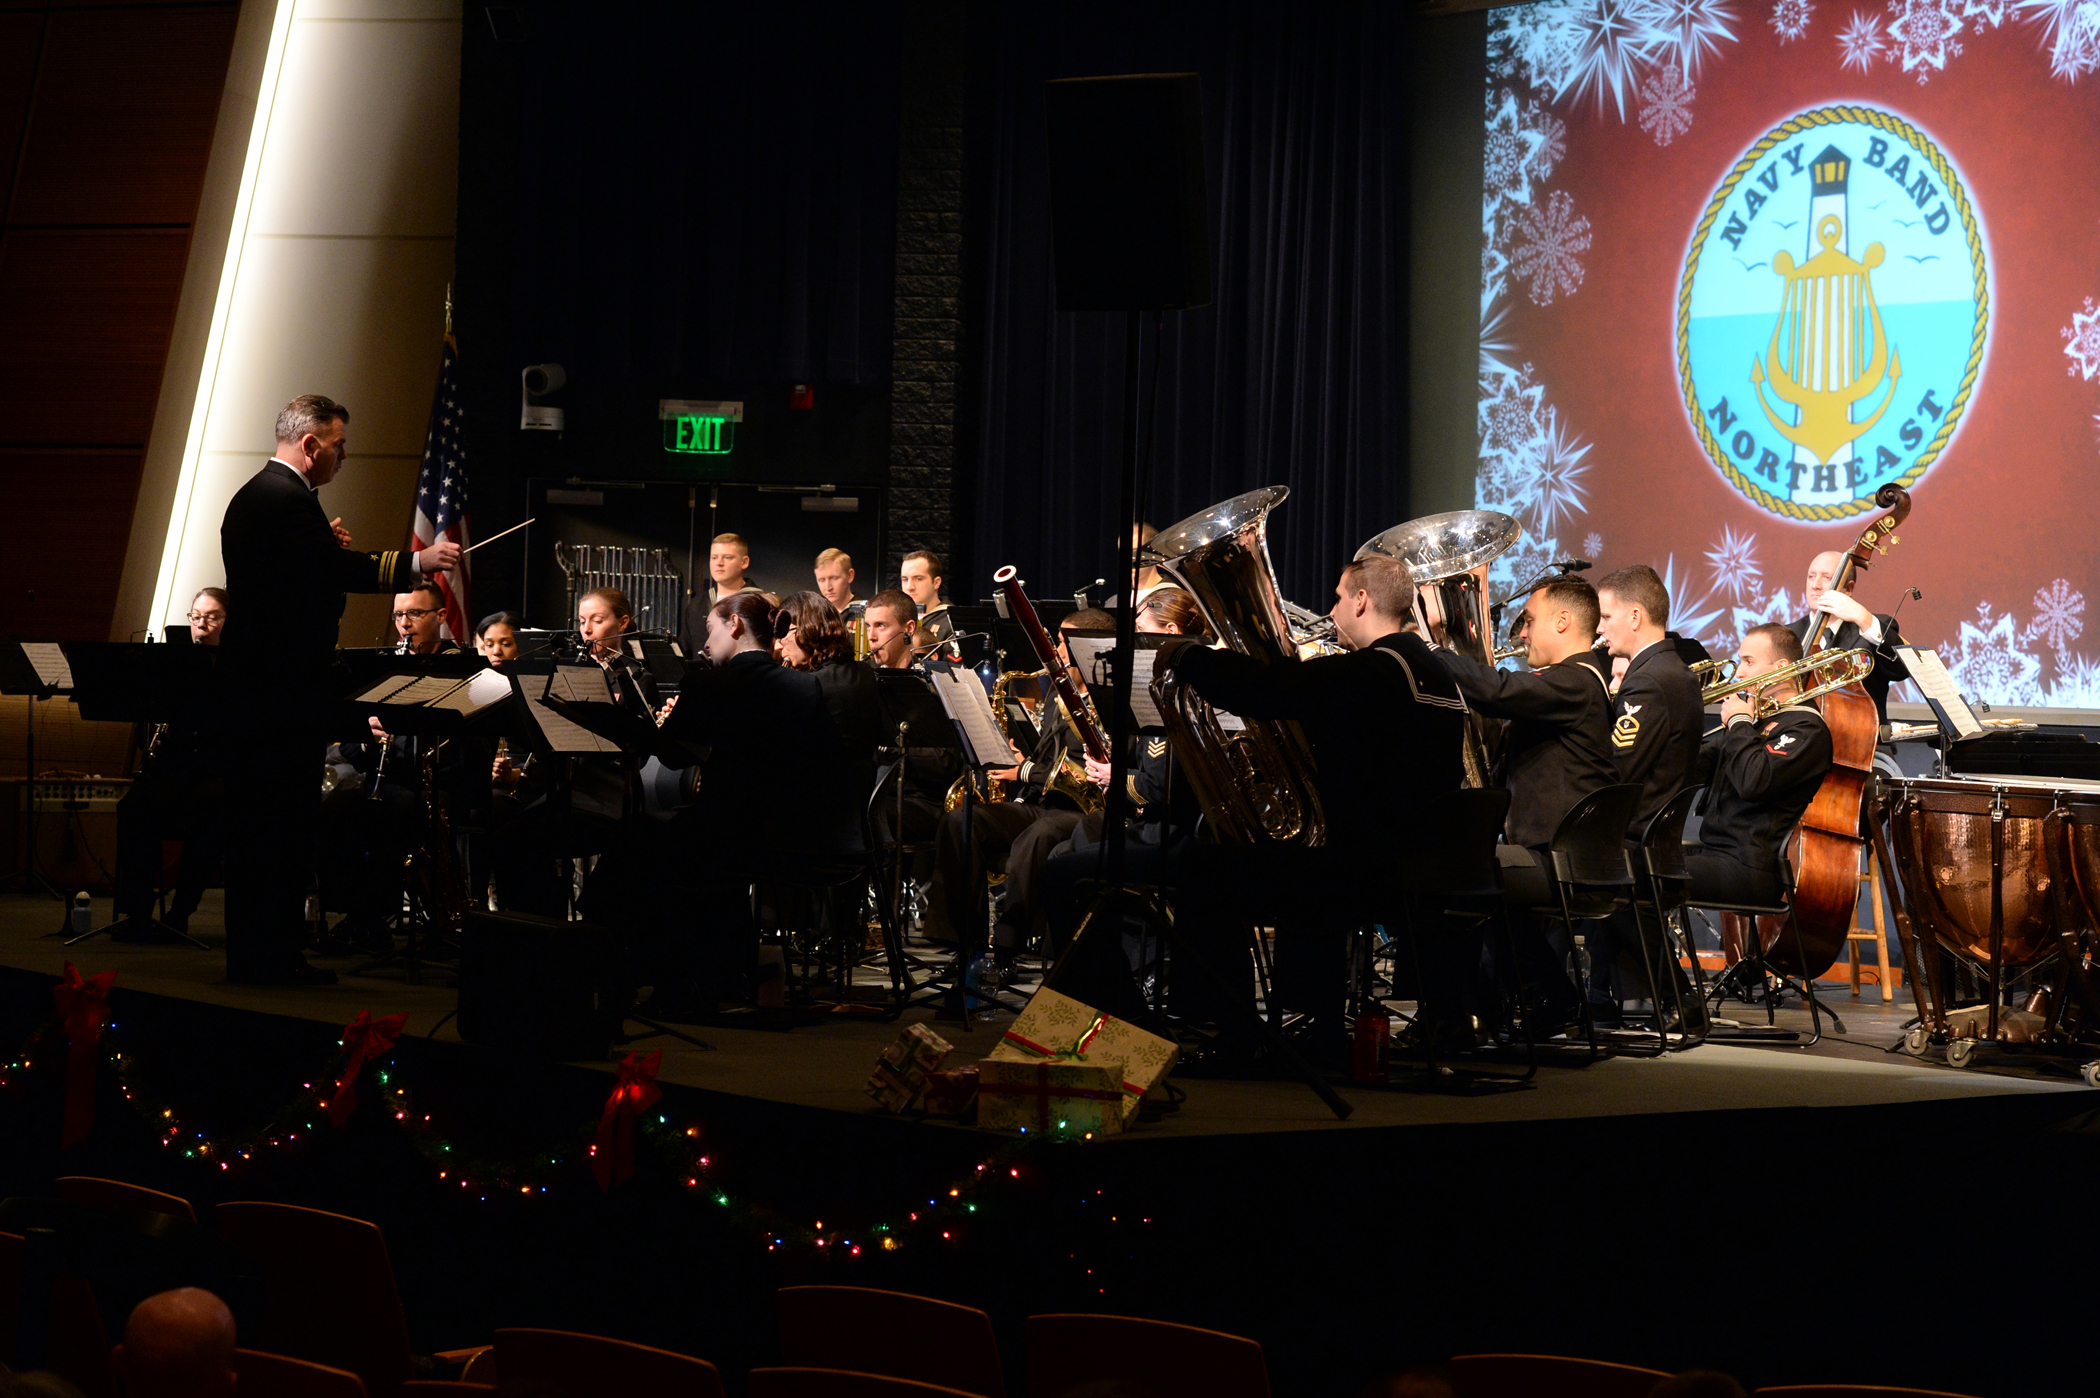 141214-N-PX557-035 NEWPORT, R.I. (Dec. 14, 2014) Lt. Cmdr. Carl Gerhard, director and bandmaster for Navy Band Northeast (NBNE), conducts “A Christmas Festival” during Navy Newport’s Holiday Concert at U.S. Naval War College (NWC) in Newport, Rhode Island. The free concert included a 15-song set presented by NBNE’s Pop Ensemble and served as an opportunity to celebrate the holiday season with guests, family and friends of NWC and Naval Station (NAVSTA) Newport. Established in 1974, NBNE is based on board NAVSTA Newport and is one of 11 official U.S. Navy bands worldwide, providing musical support for military ceremonies, recruiting, morale and retention programs and community relations. (U.S. Navy photo by Chief Mass Communication Specialist James E. Foehl/Released)